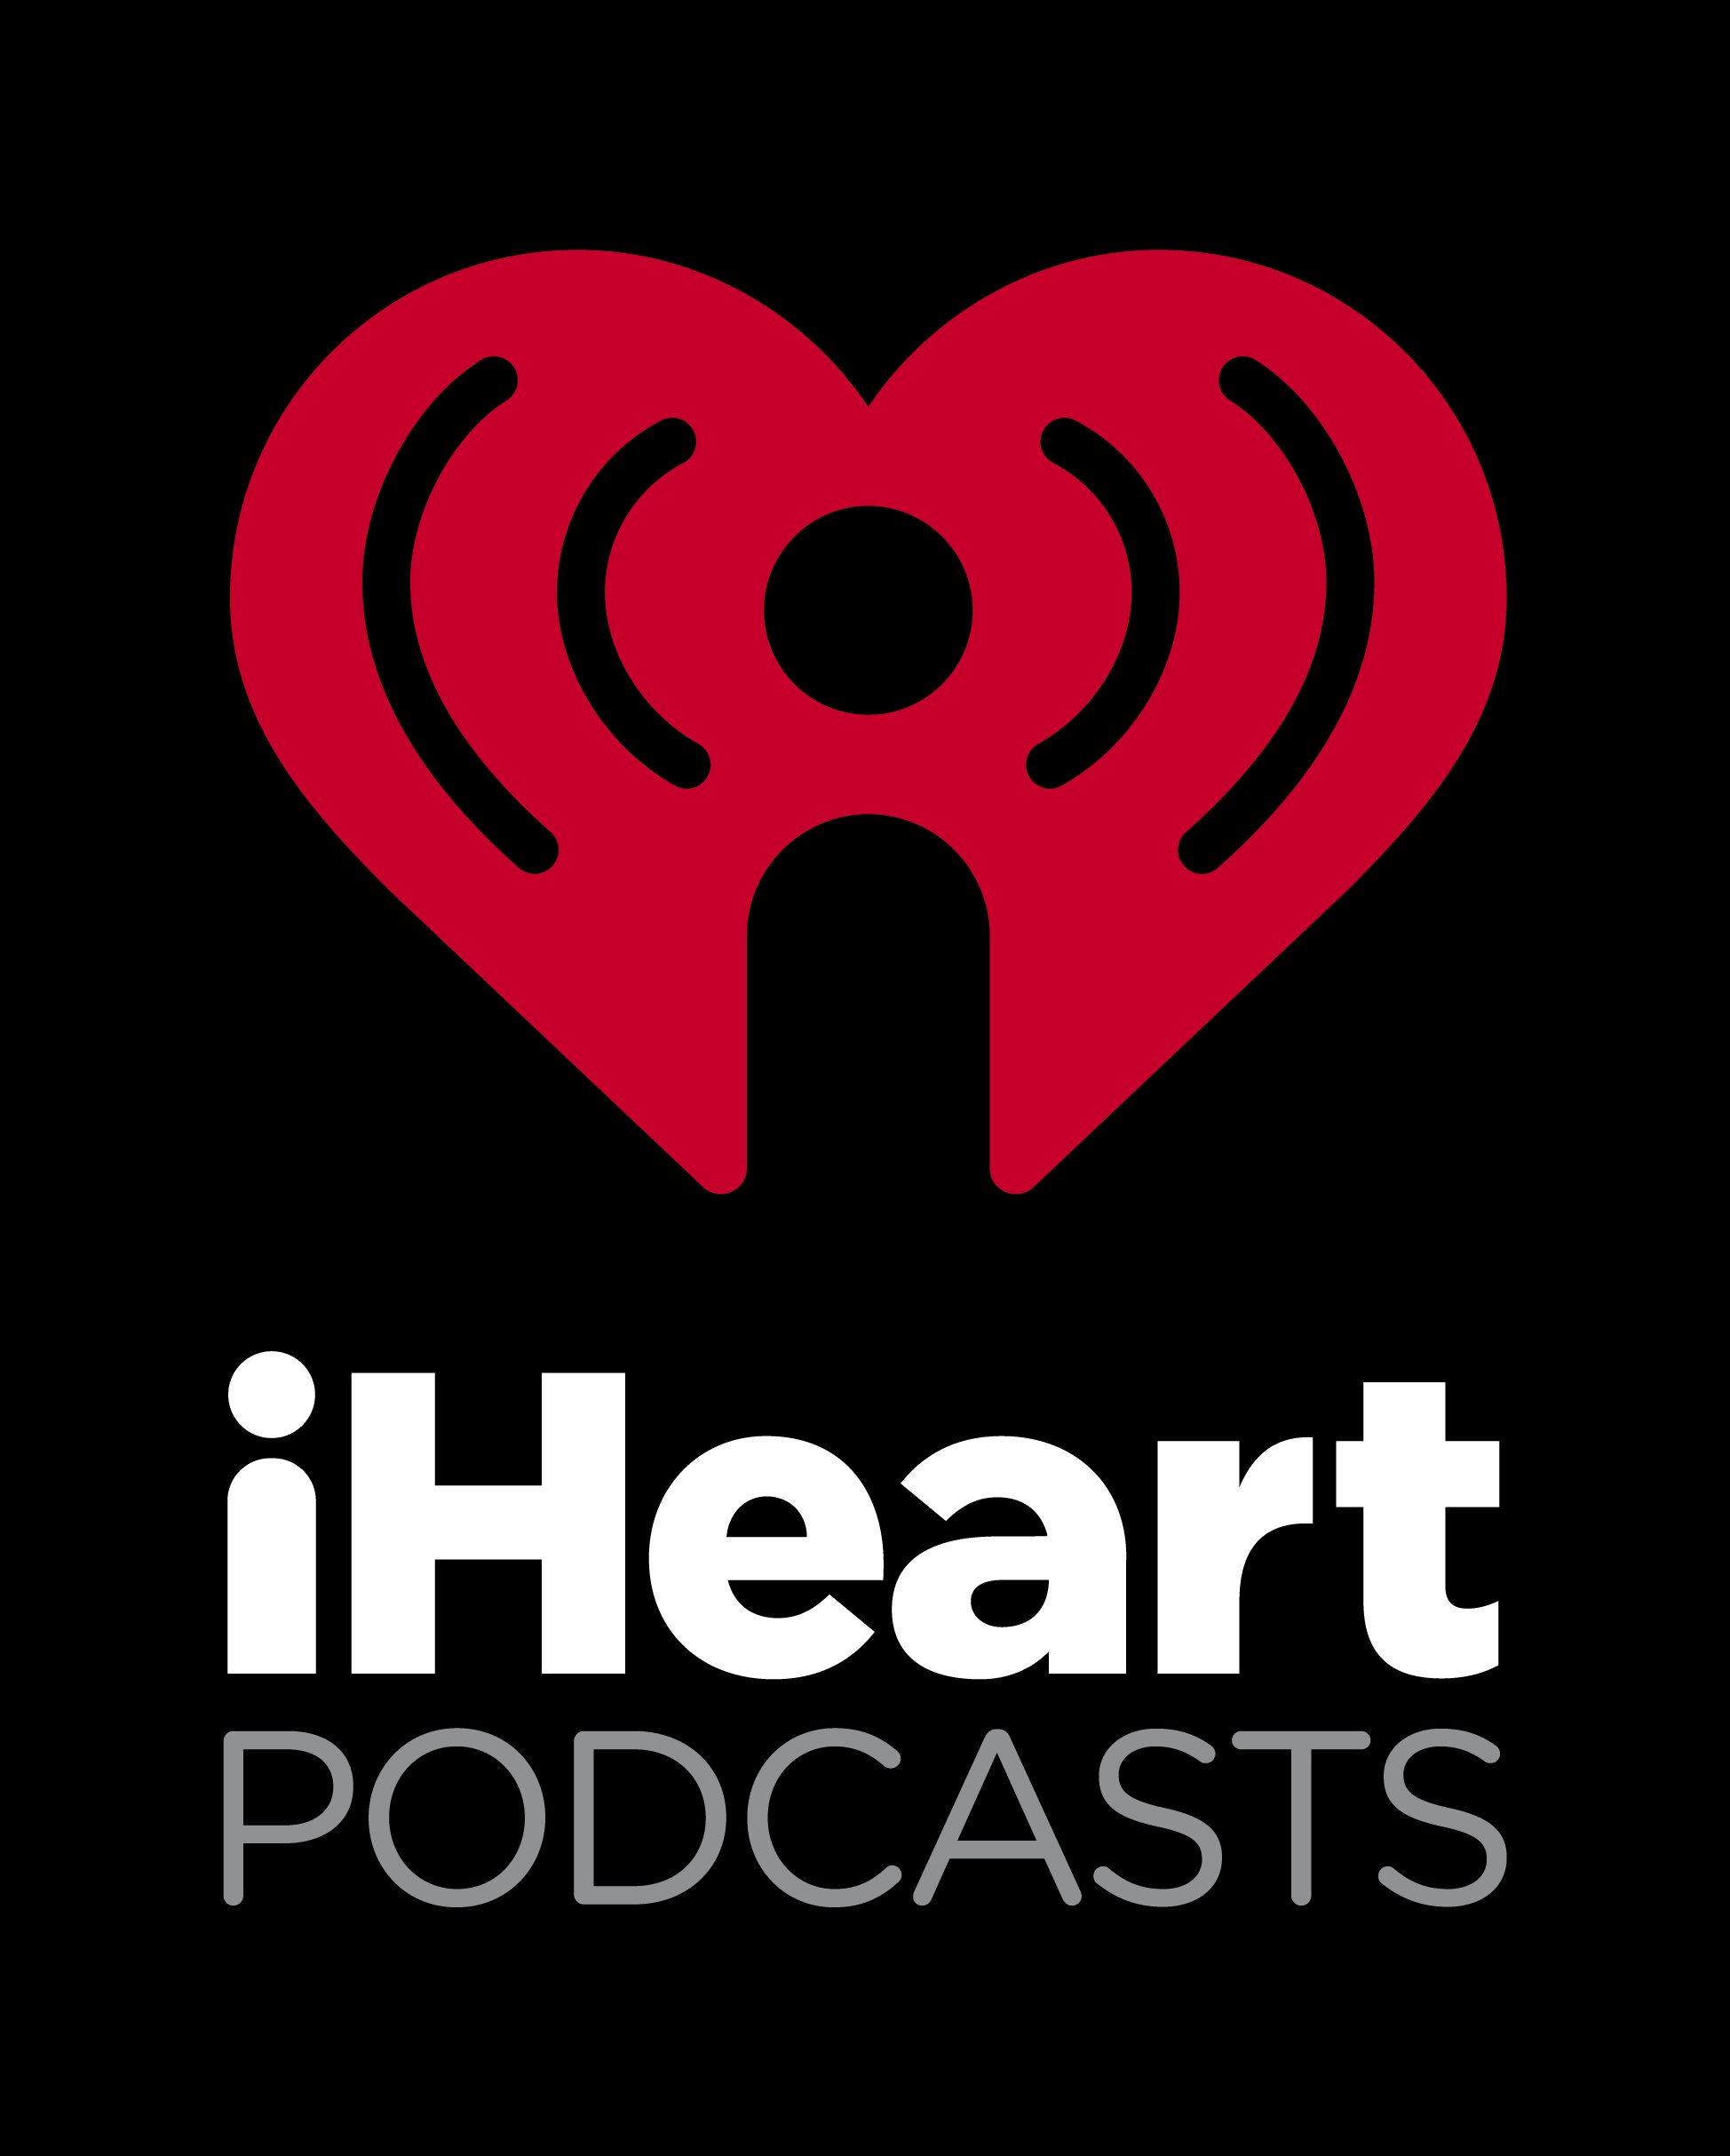 iHeartPodcasts__STK_COLOR_WHITE.jpg